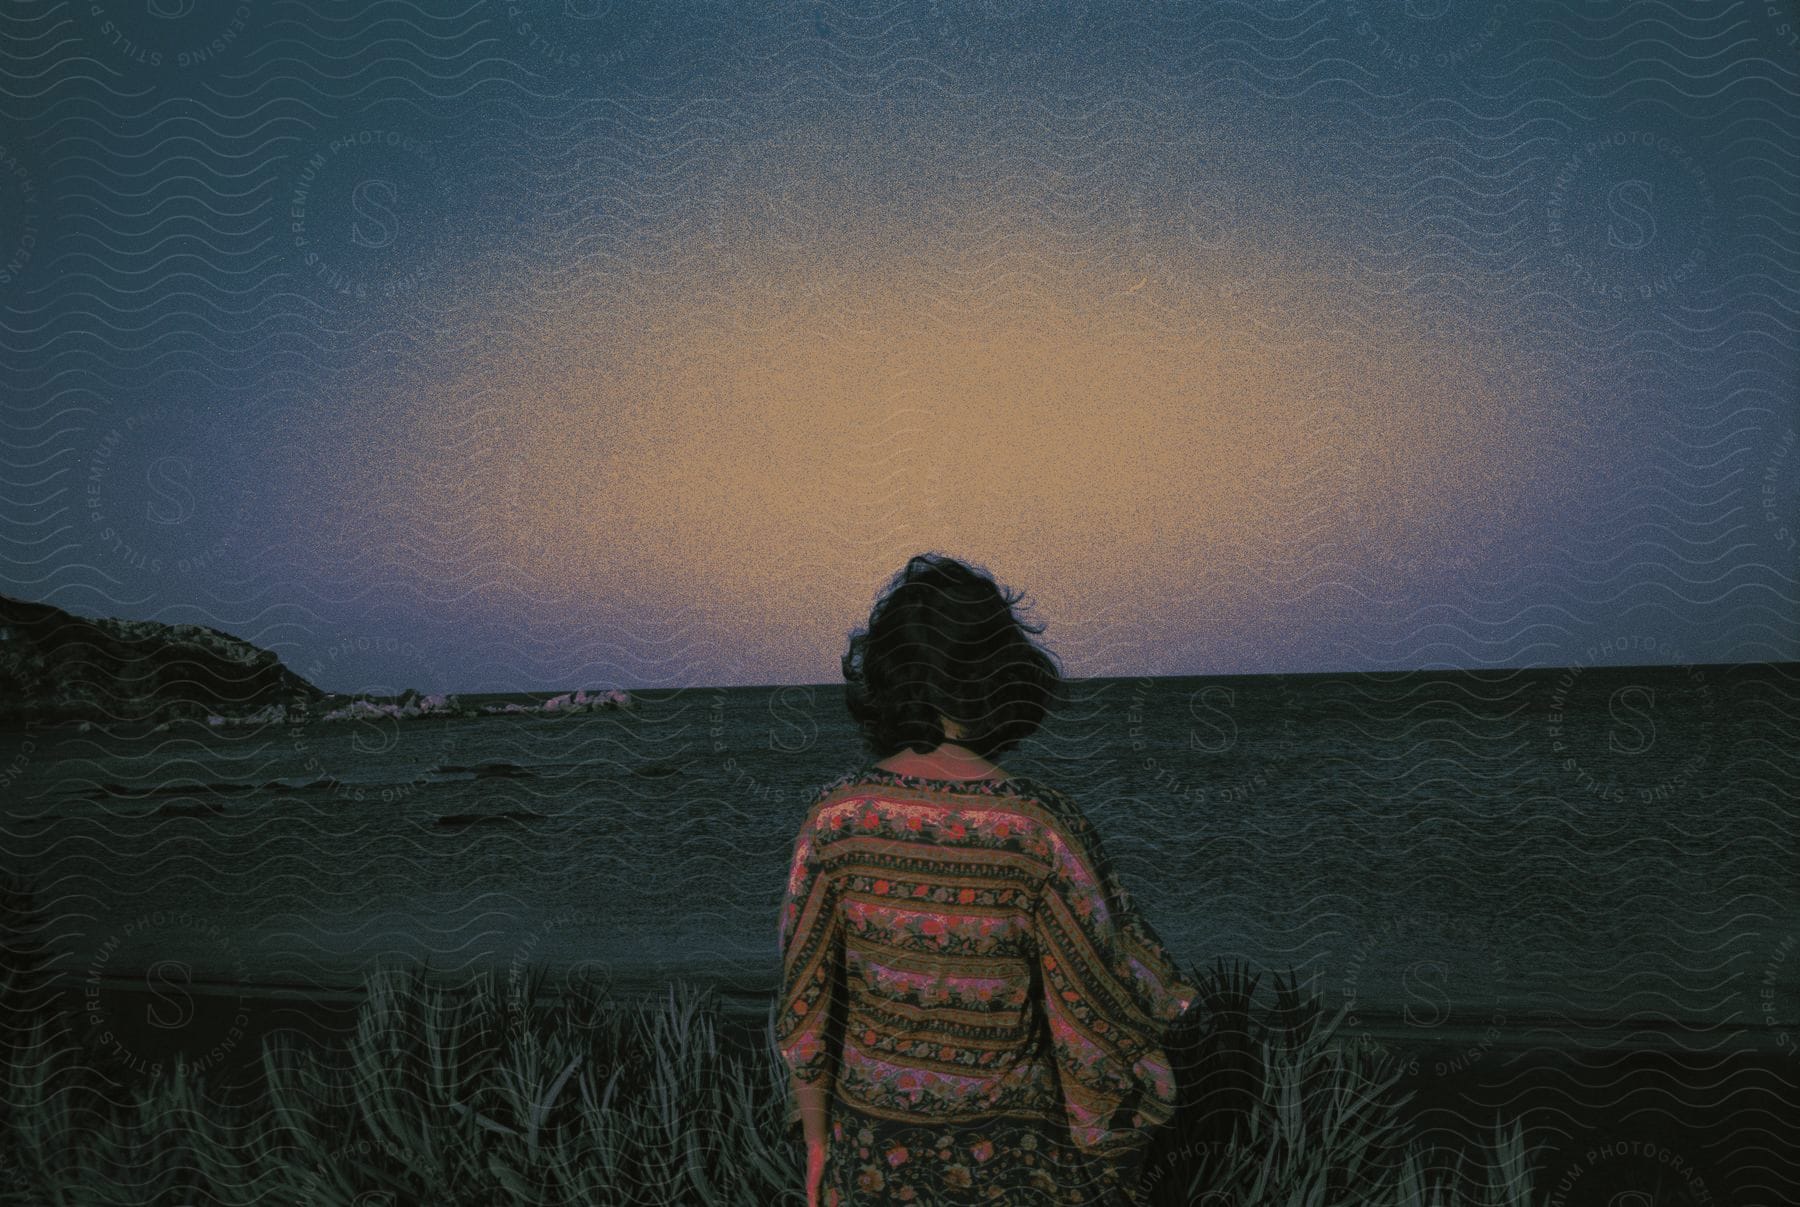 A young girl stands outside looking out over the ocean